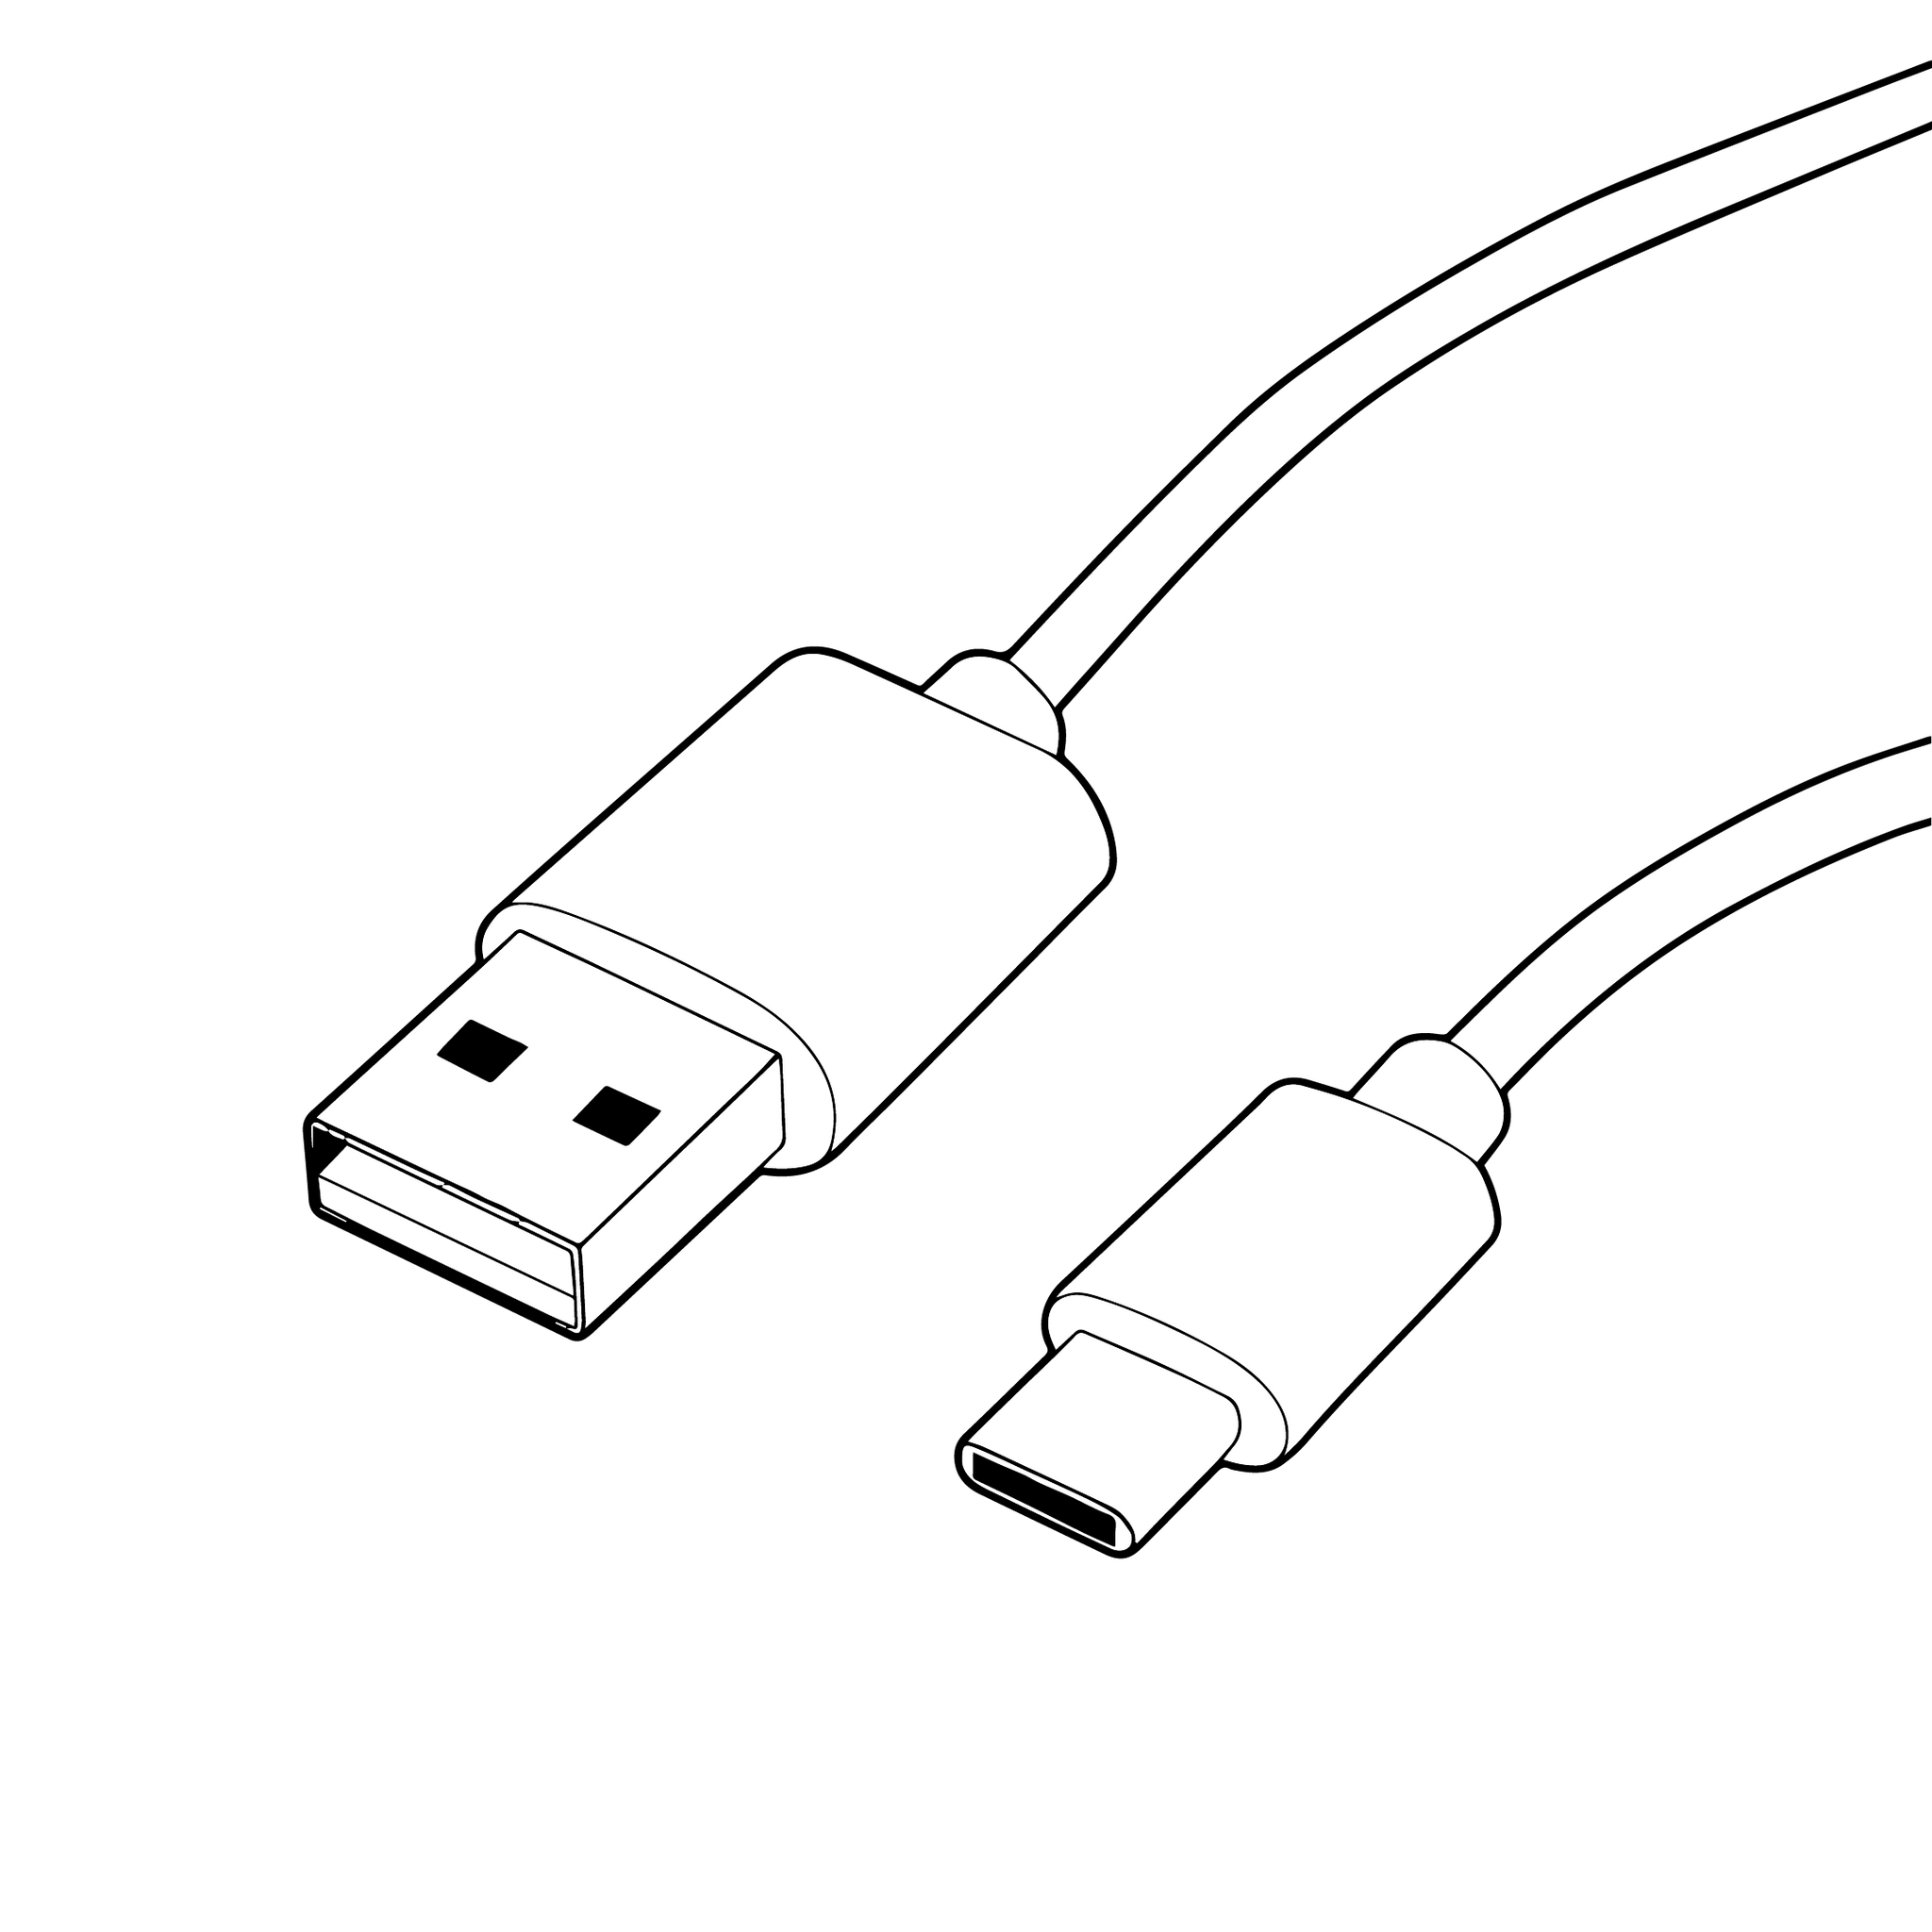 Explained: What Is USB-C? 